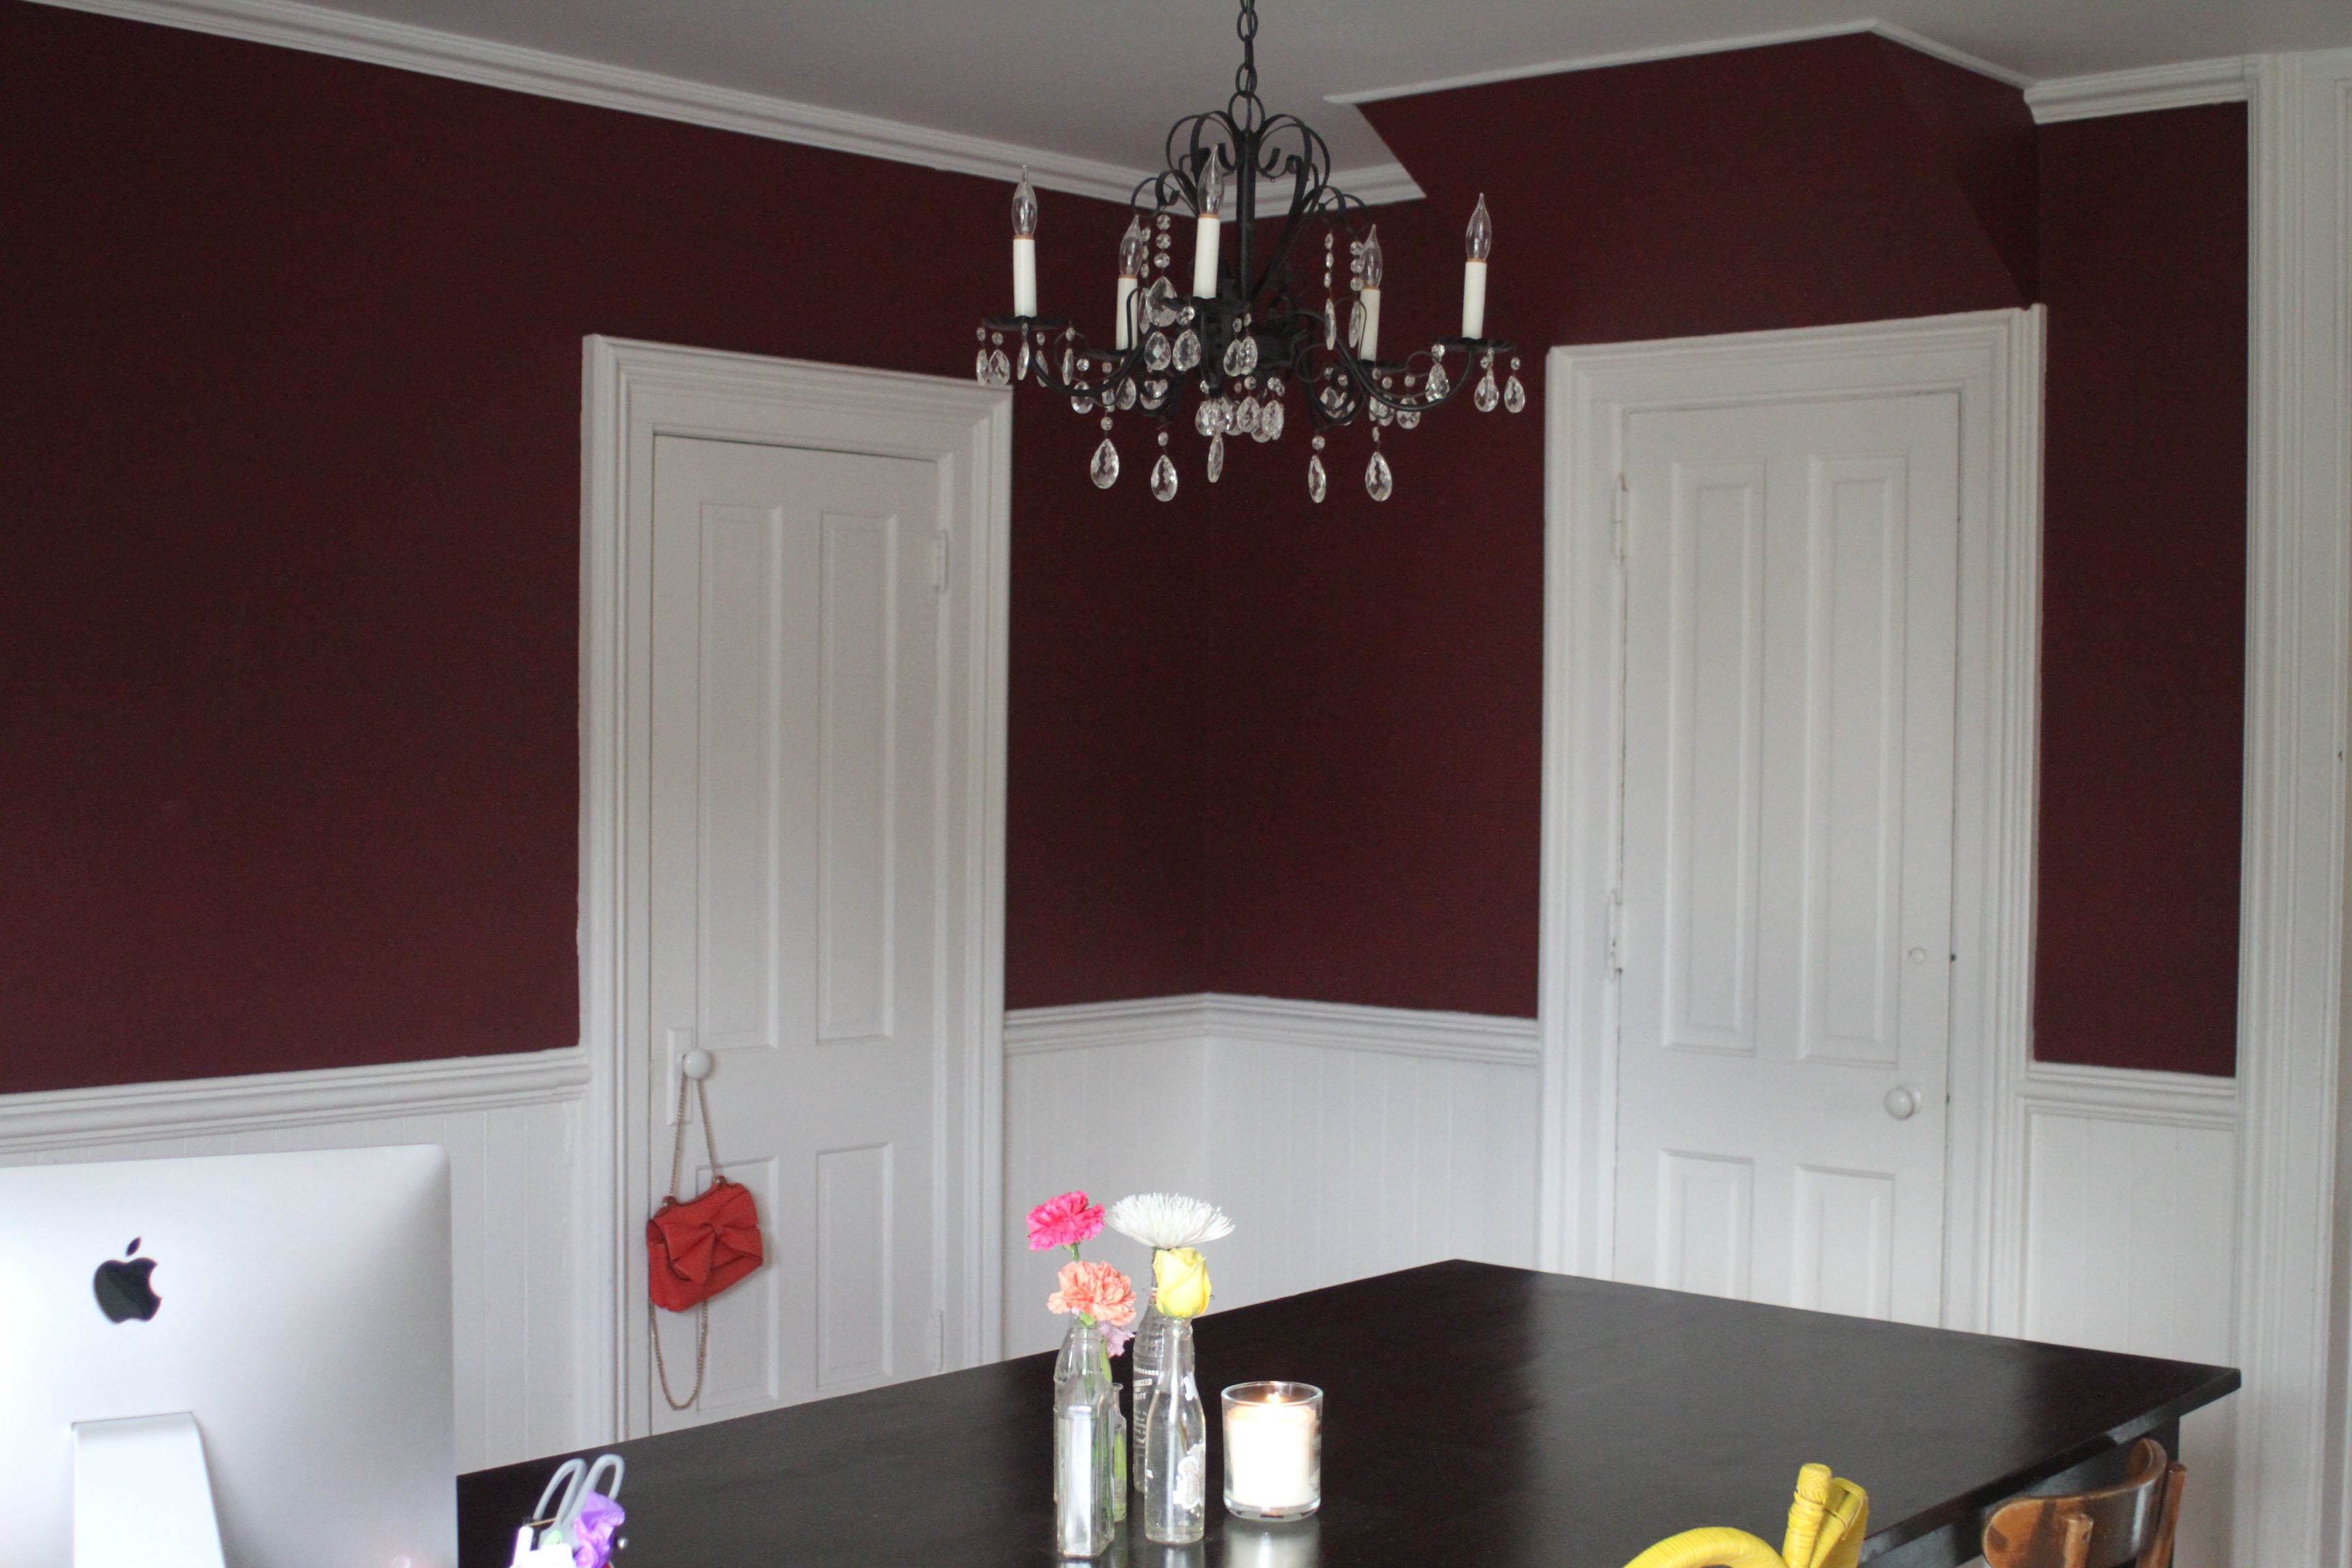 Before & After: A Dining Room Goes From Crimson to Gargoyle Shadow